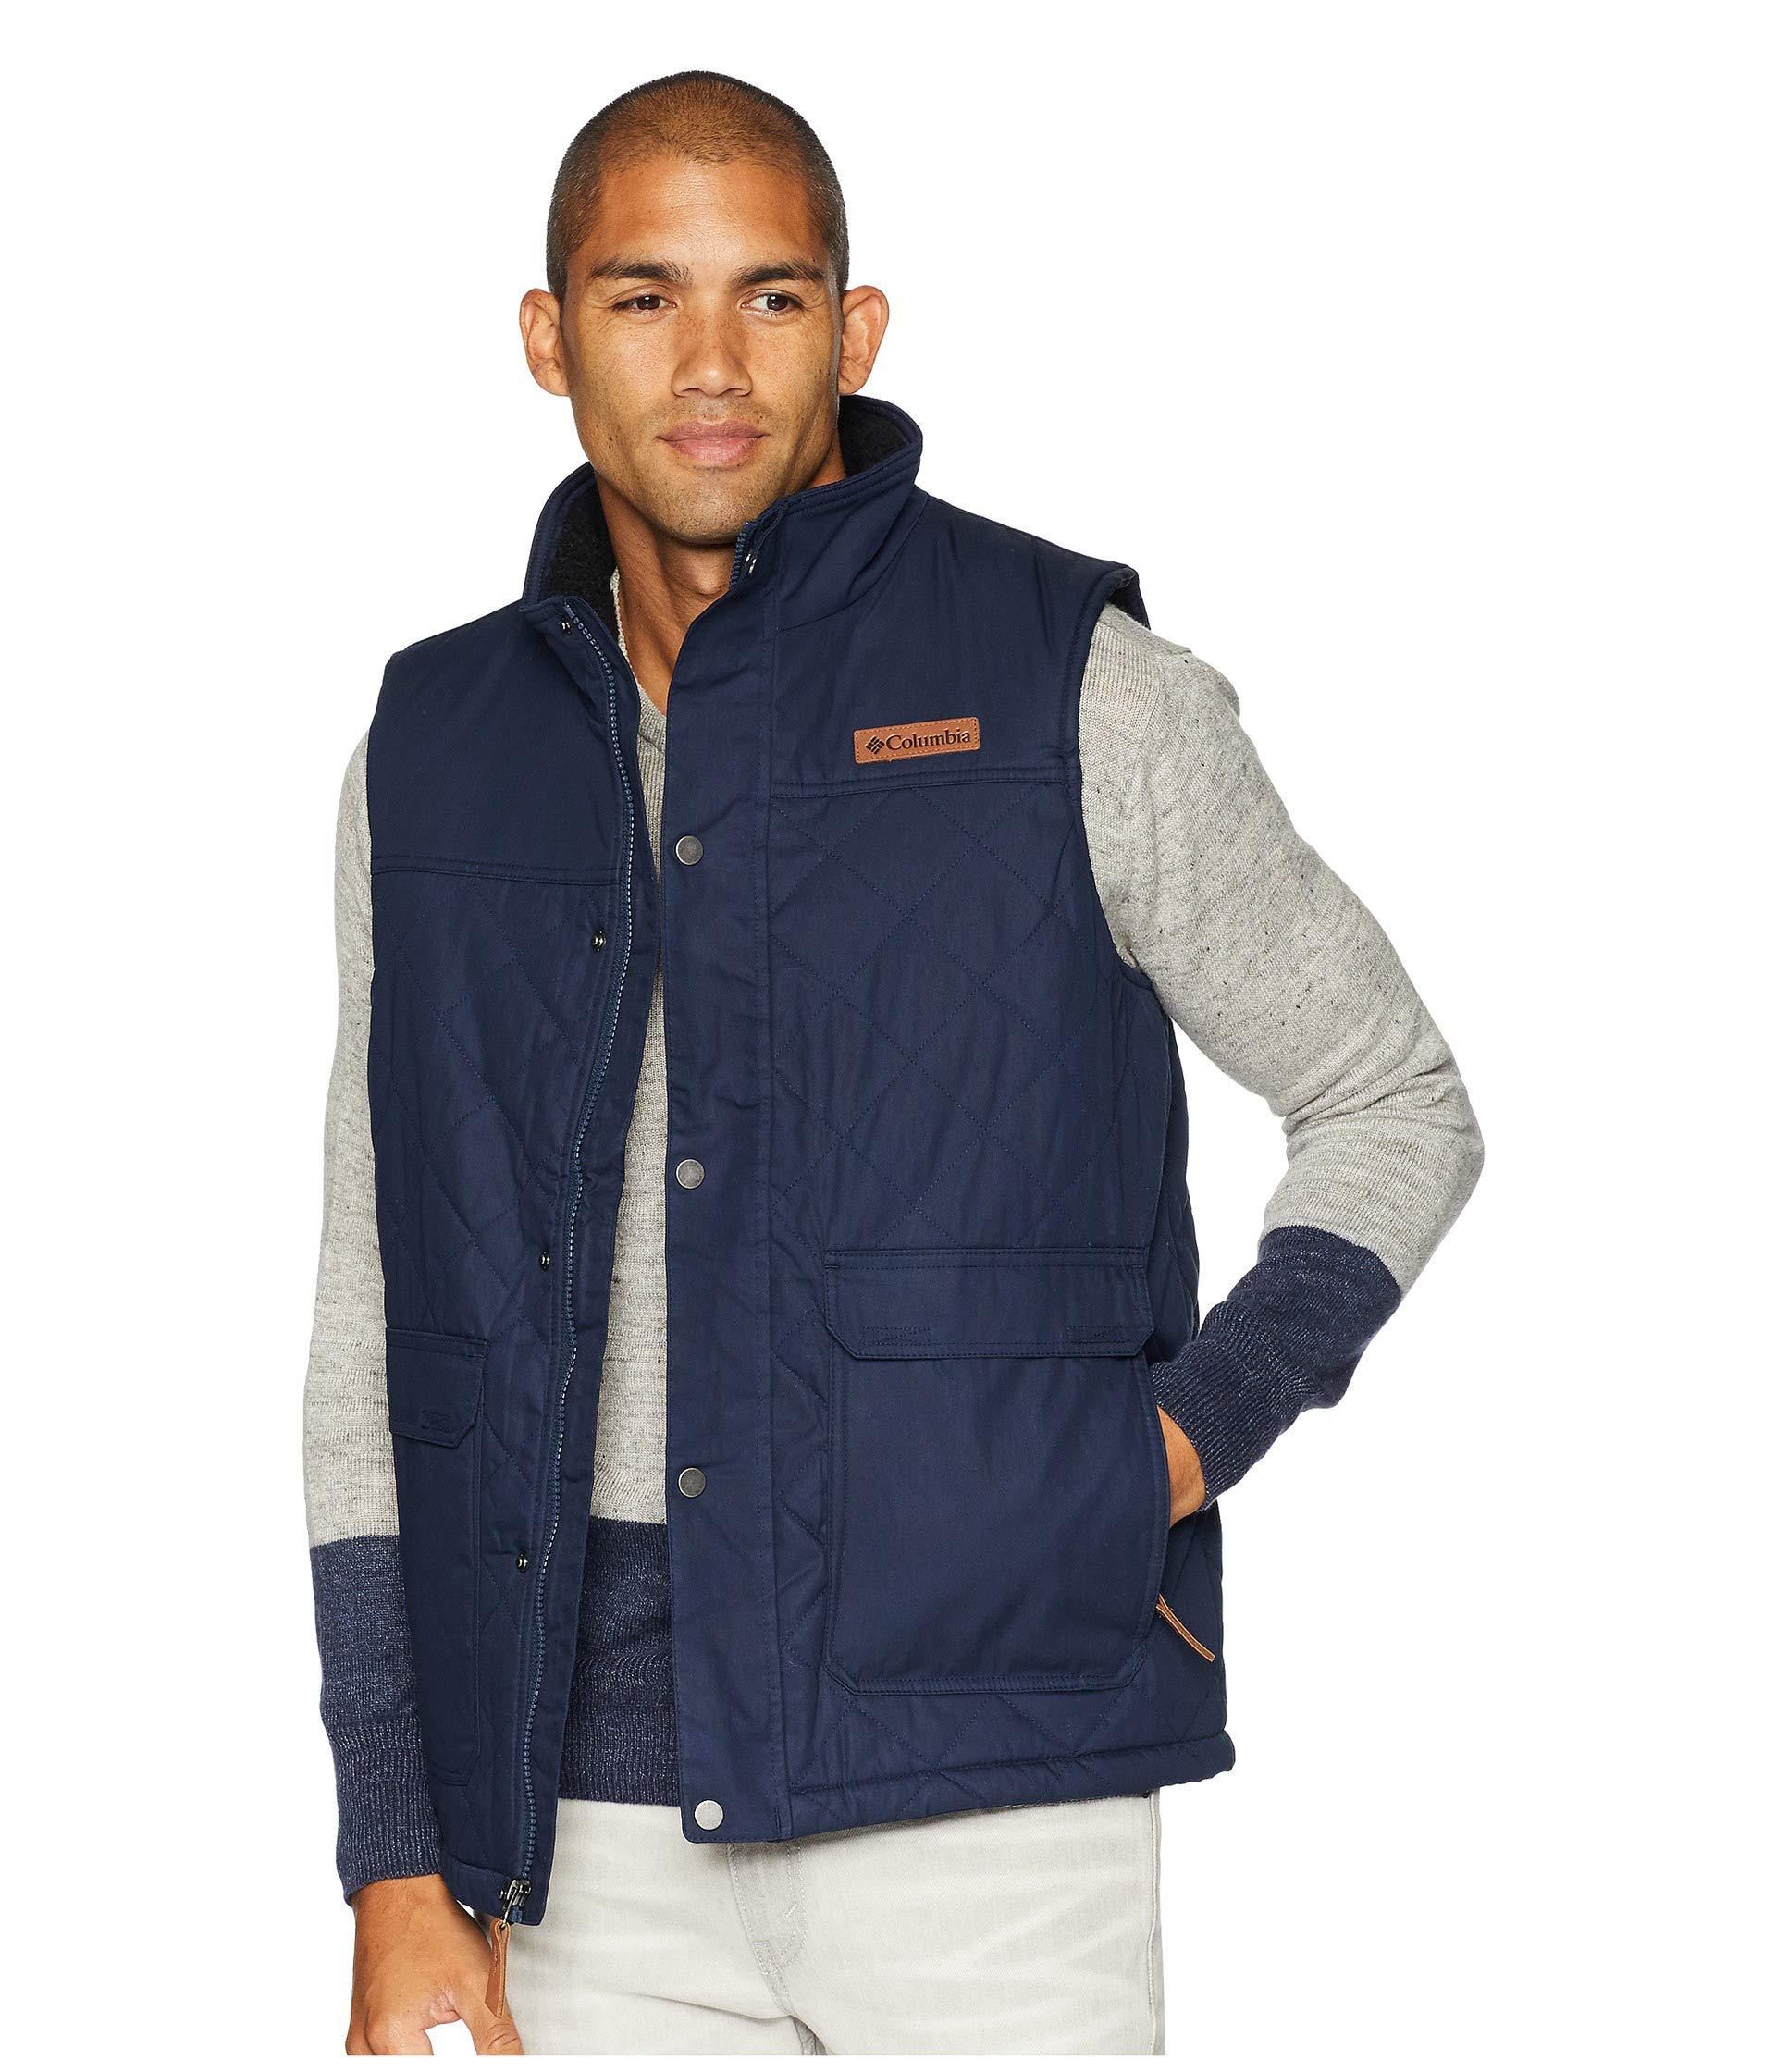 columbia quilted jacket